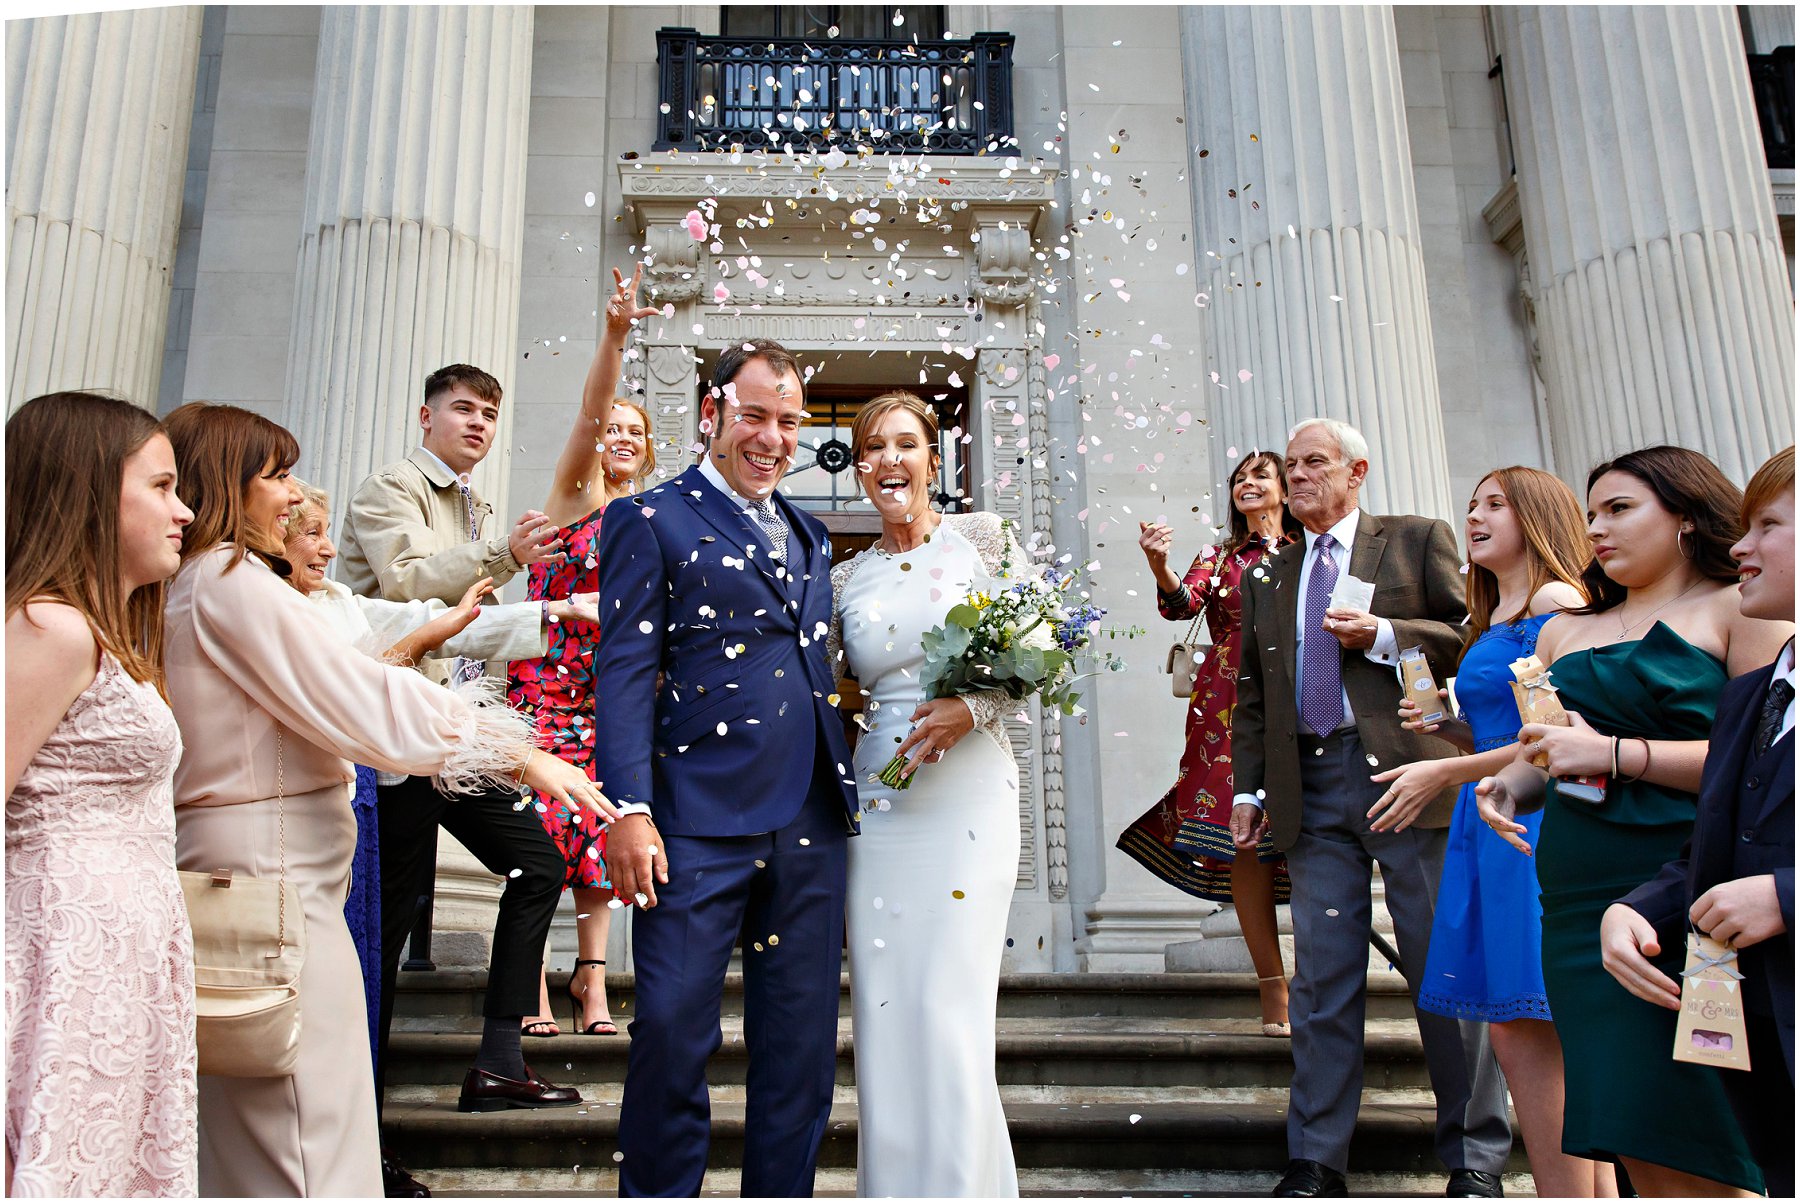 Confetti throw on the steps of The Old Marylebone Town Hall by YBPHOTOGRAPHIC